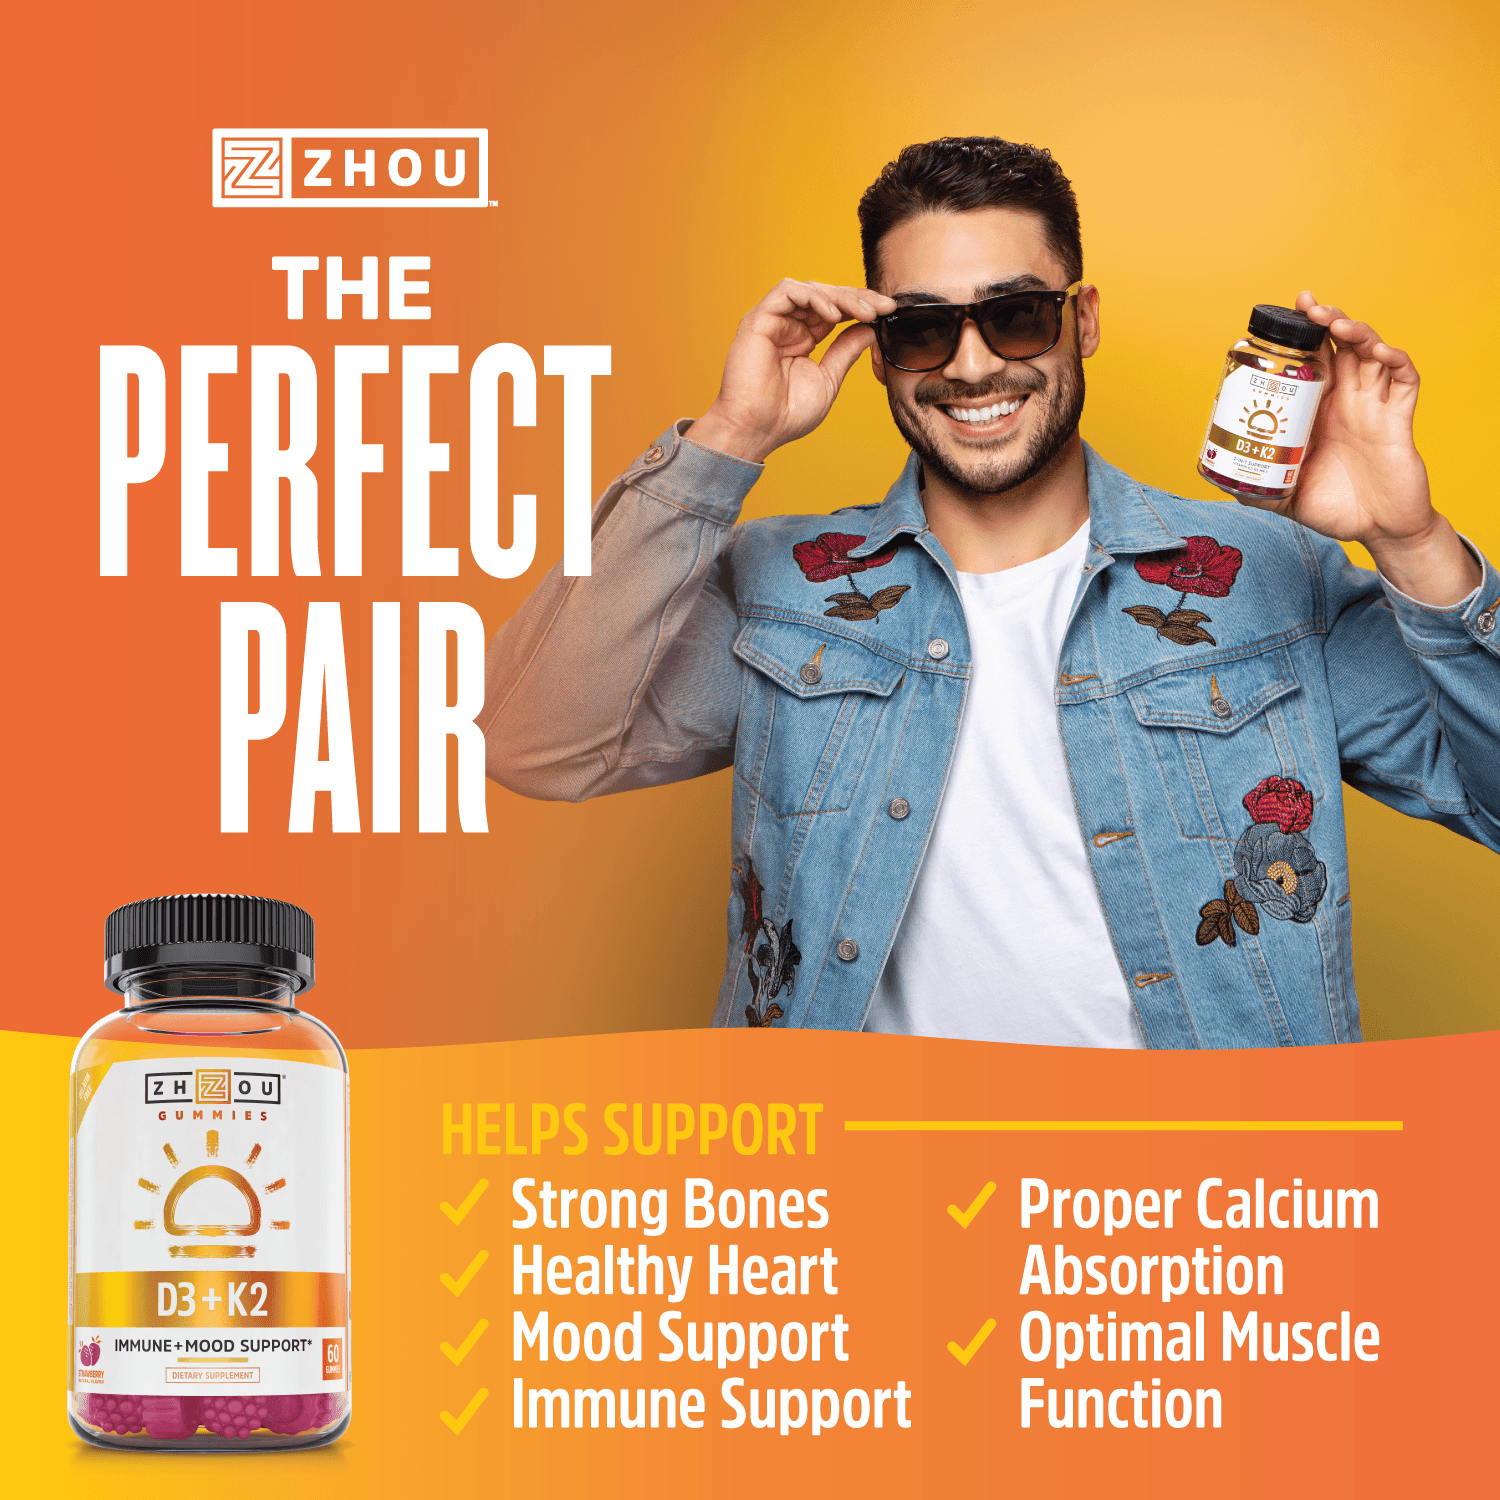 The perfect pair. Helps support strong bones, healthy heart, mood support, immune support, proper calcium absorption, optimal muscle function.